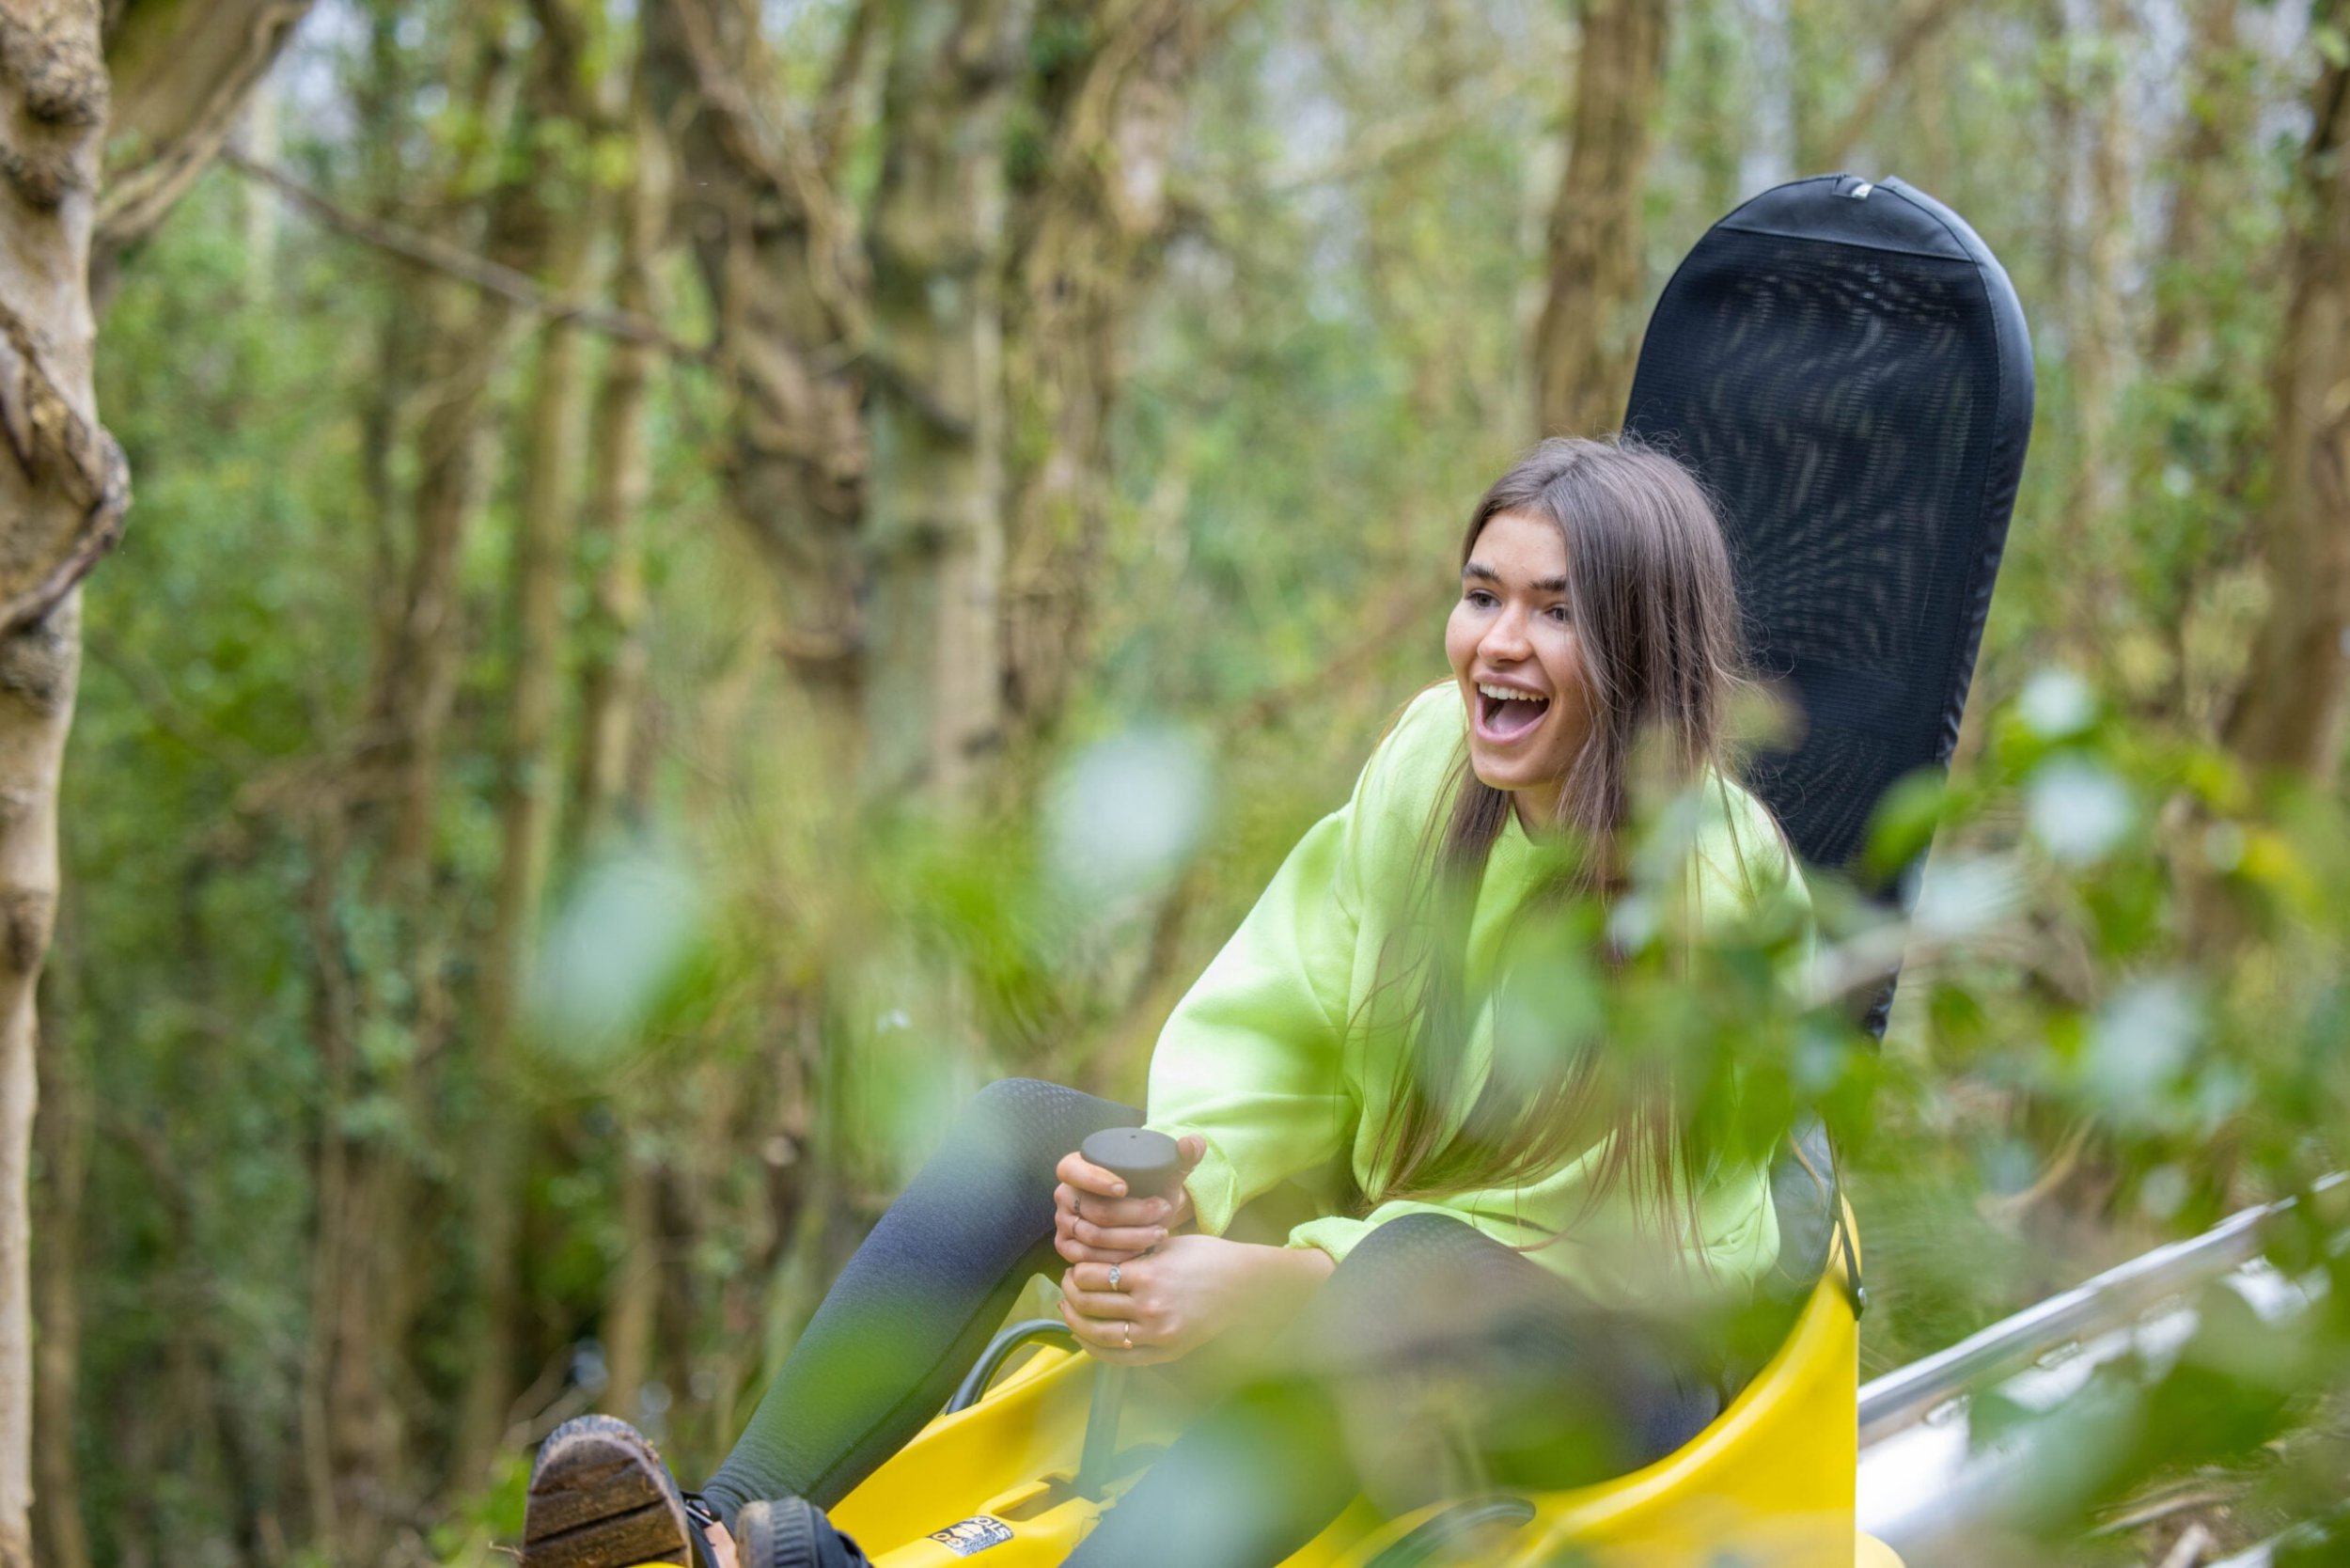 I tried Ireland’s first and only alpine coaster – it’s so much fun and people don’t even know it exists